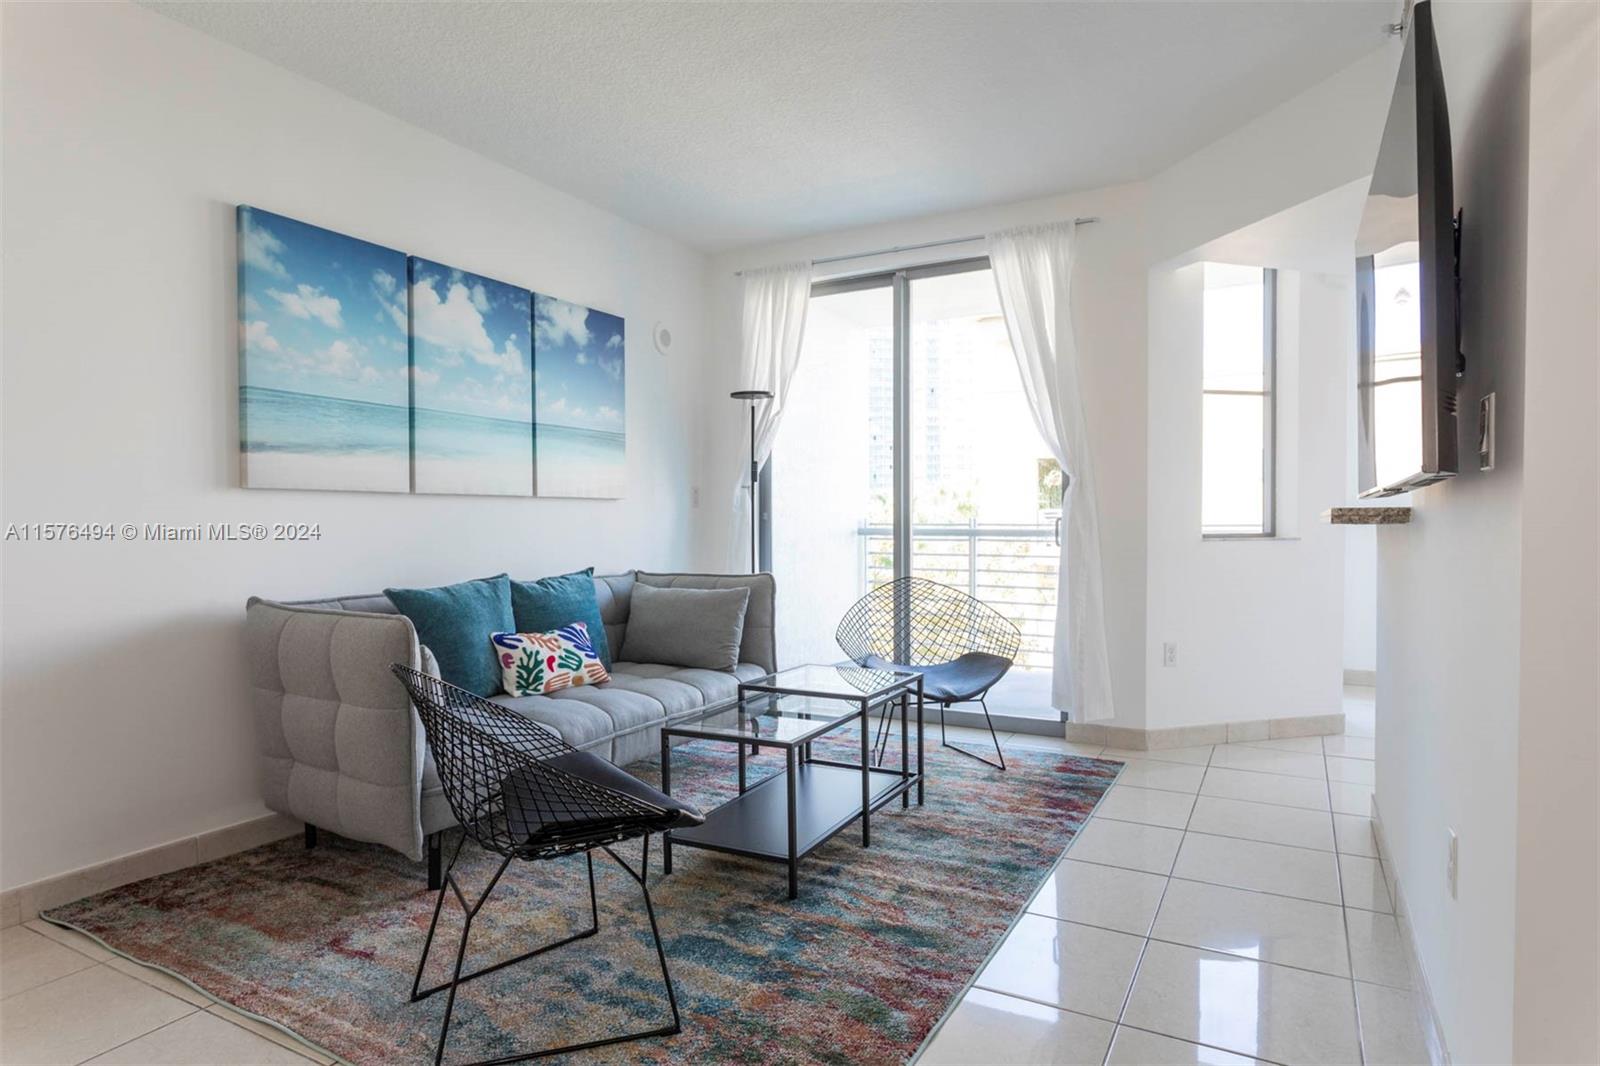 AVAILABLE TO RENT FOR 6 MONTHS OR A YEAR! Newly updated & furnished. Located in the desirable South of Fifth neighborhood, only 2 blocks from the Ocean, this bright and large unit is the perfect Beach Pad with a private balcony, gourmet kitchen and stainless steel appliances. 24 hour security, front desk, resort-like pool area, and gym.